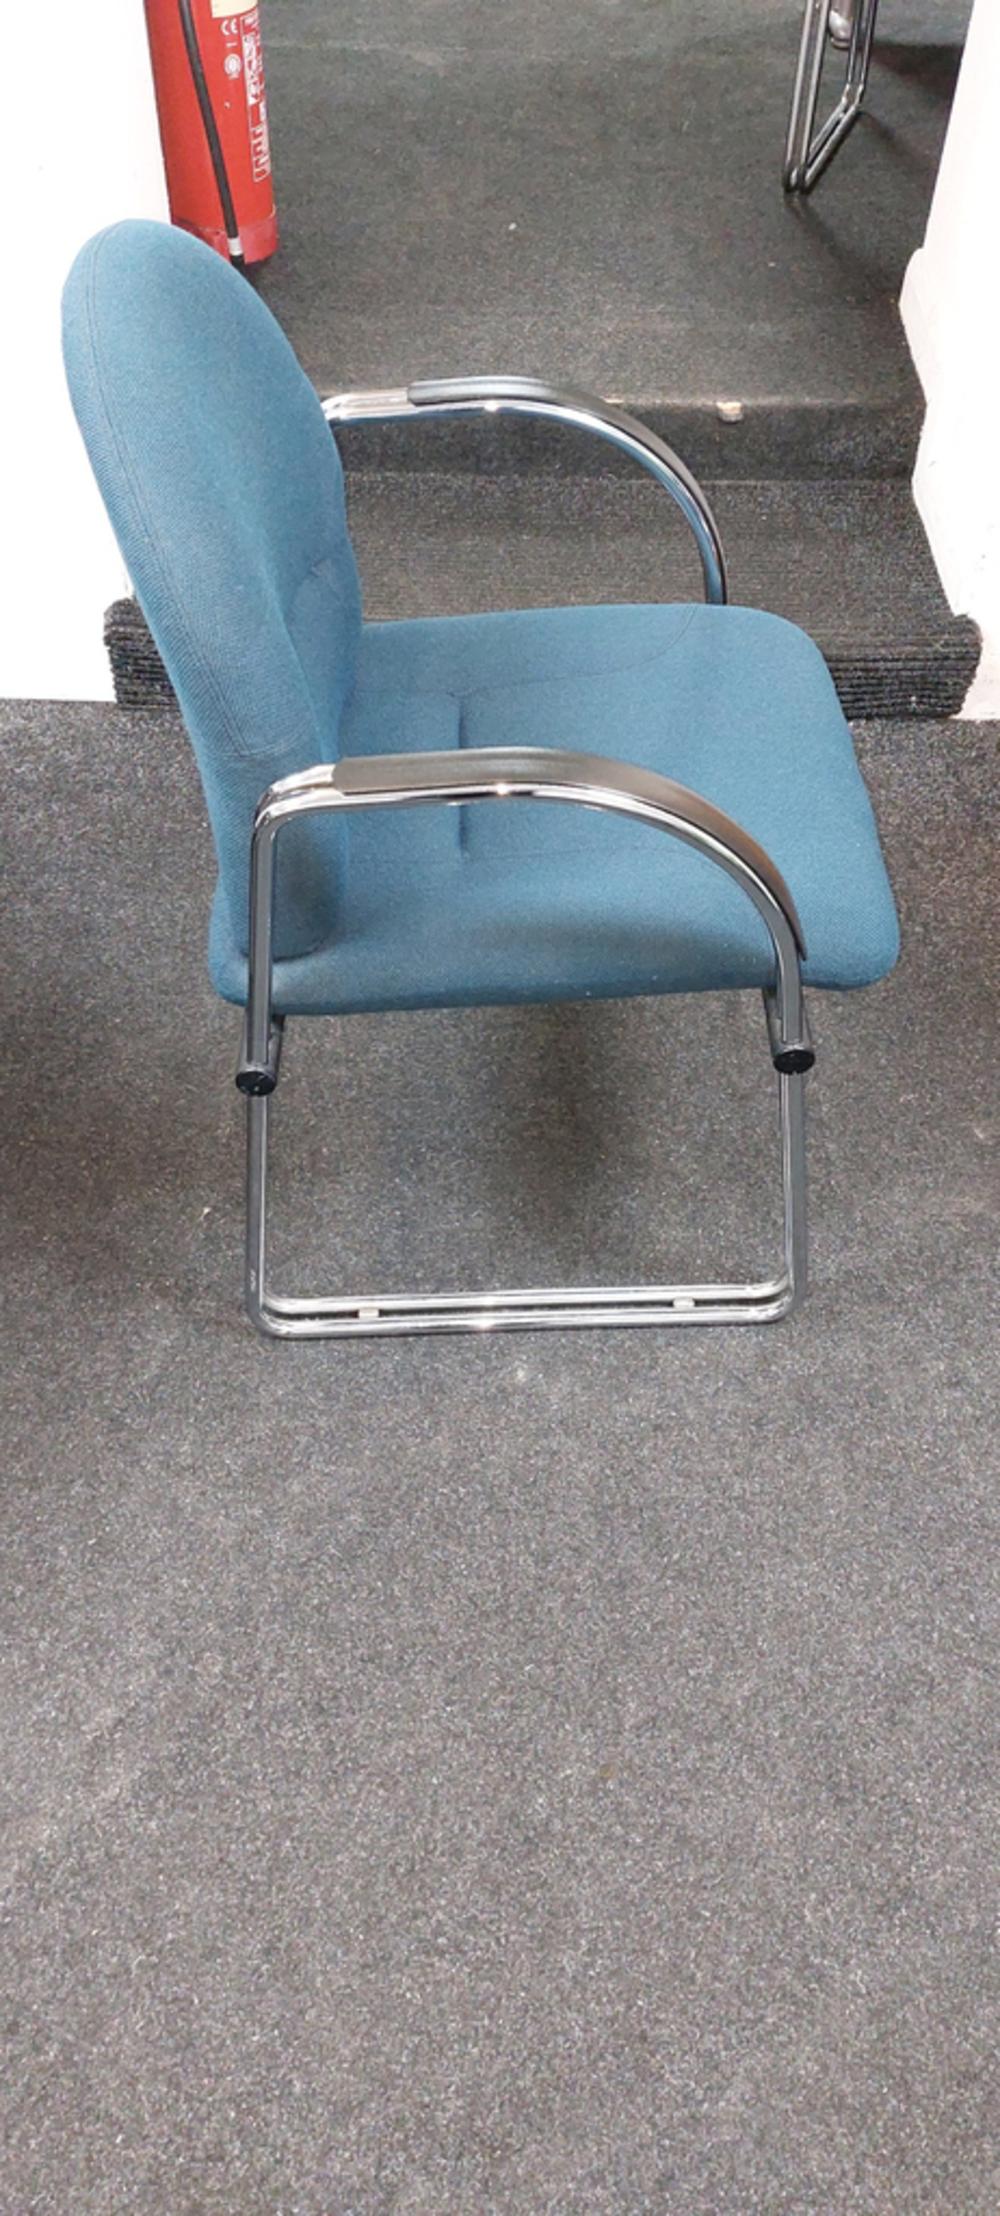 Green Fabric Meeting Chair With Chrome Frame And Fixed Arm Rests